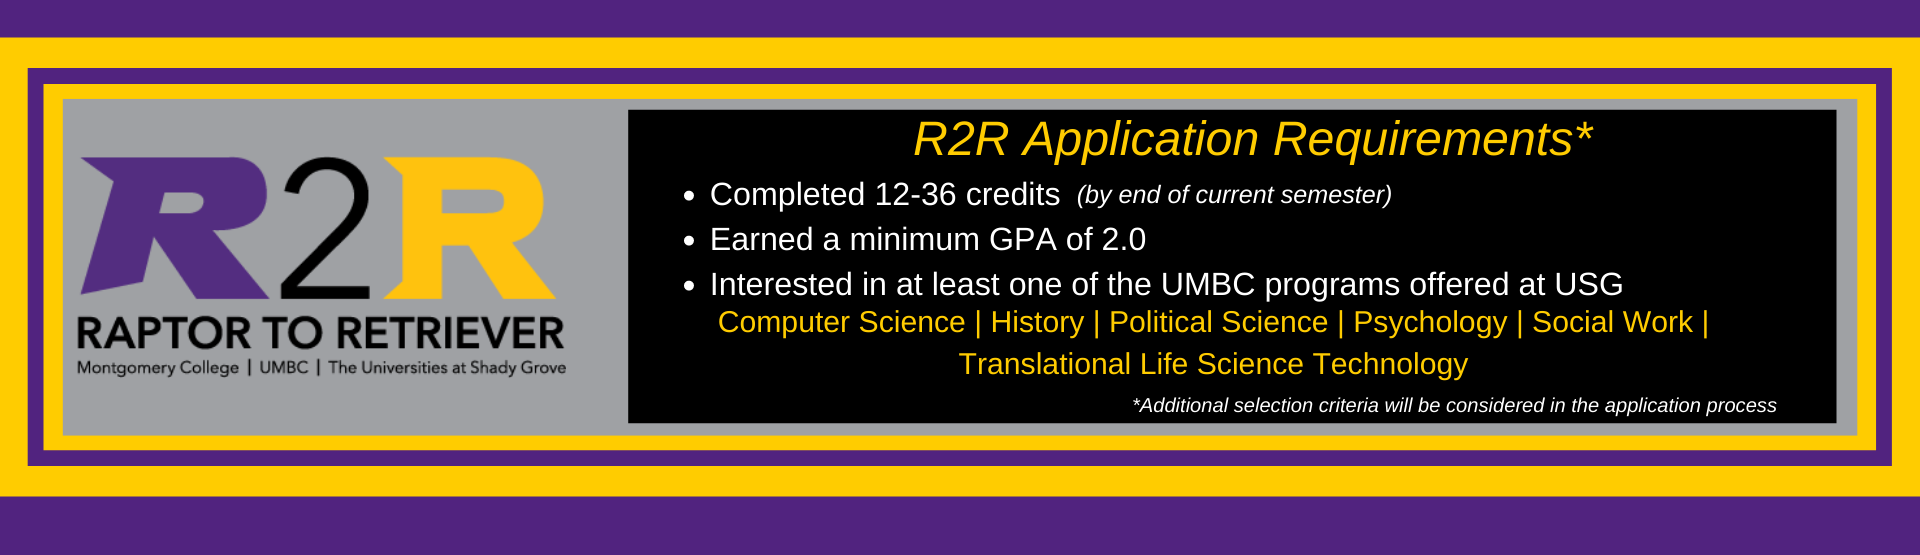 R2R Application Requirements: 2.0 minimum GPA, 12-36 completed credits, interest in at least one UMBC@USG program: History, Psychology, Social Work, Political Science, and/or Translational Life Science Technology)